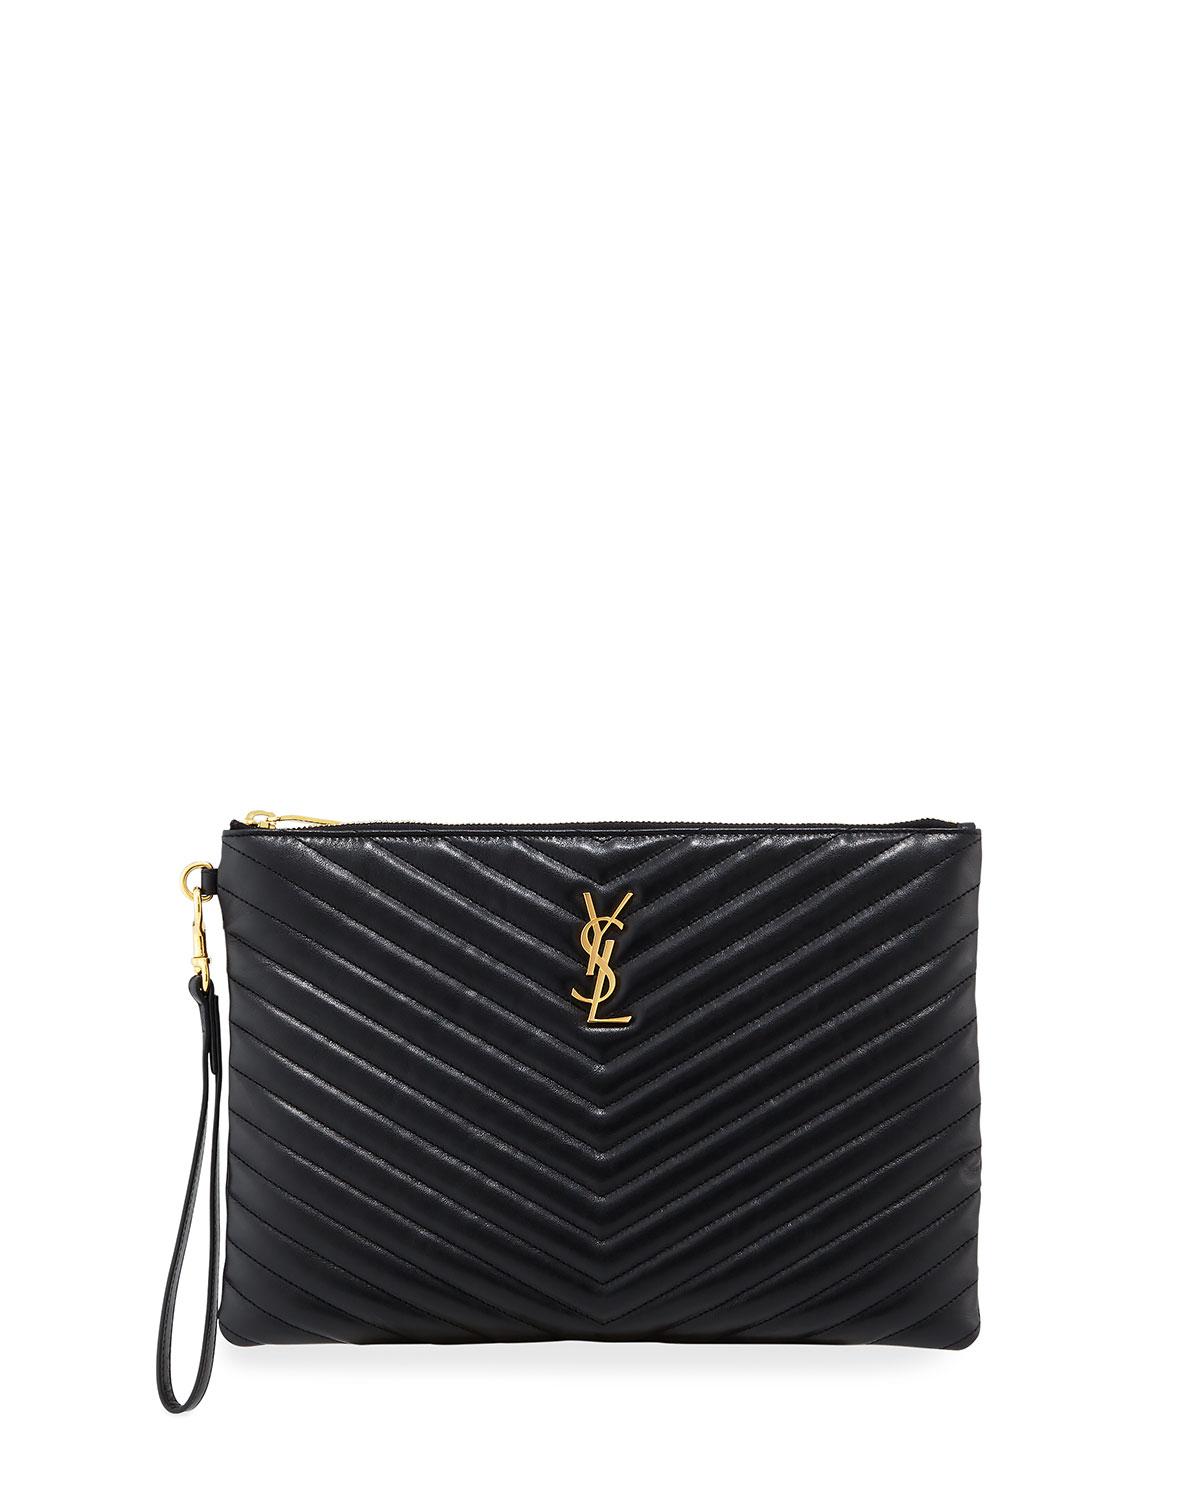 Saint Laurent Leather Monogram Ysl Quilted Wristlet Pouch Bag in Black - Lyst